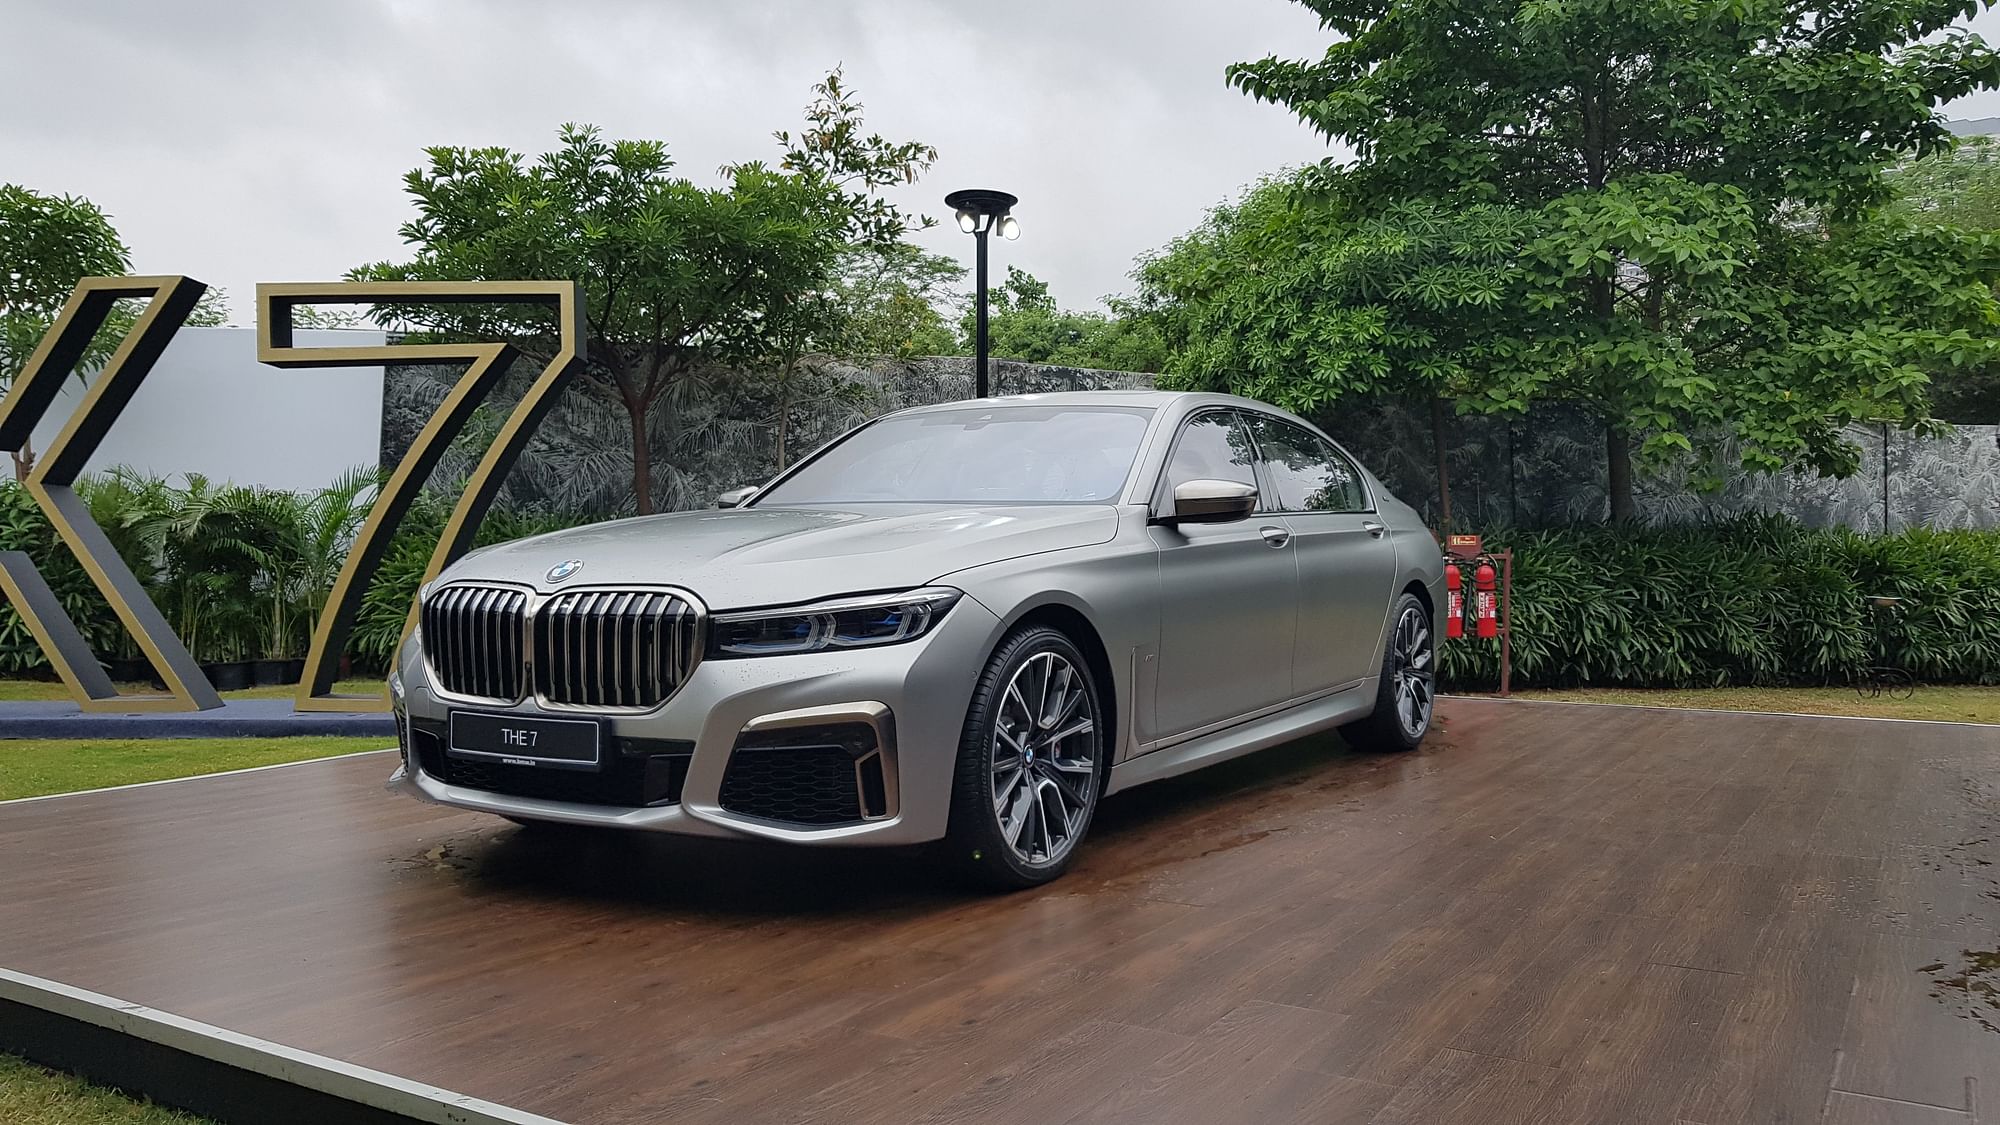 BMW X7 SUV and 2019 BMW 7-Series Sedan Launched in India: Price